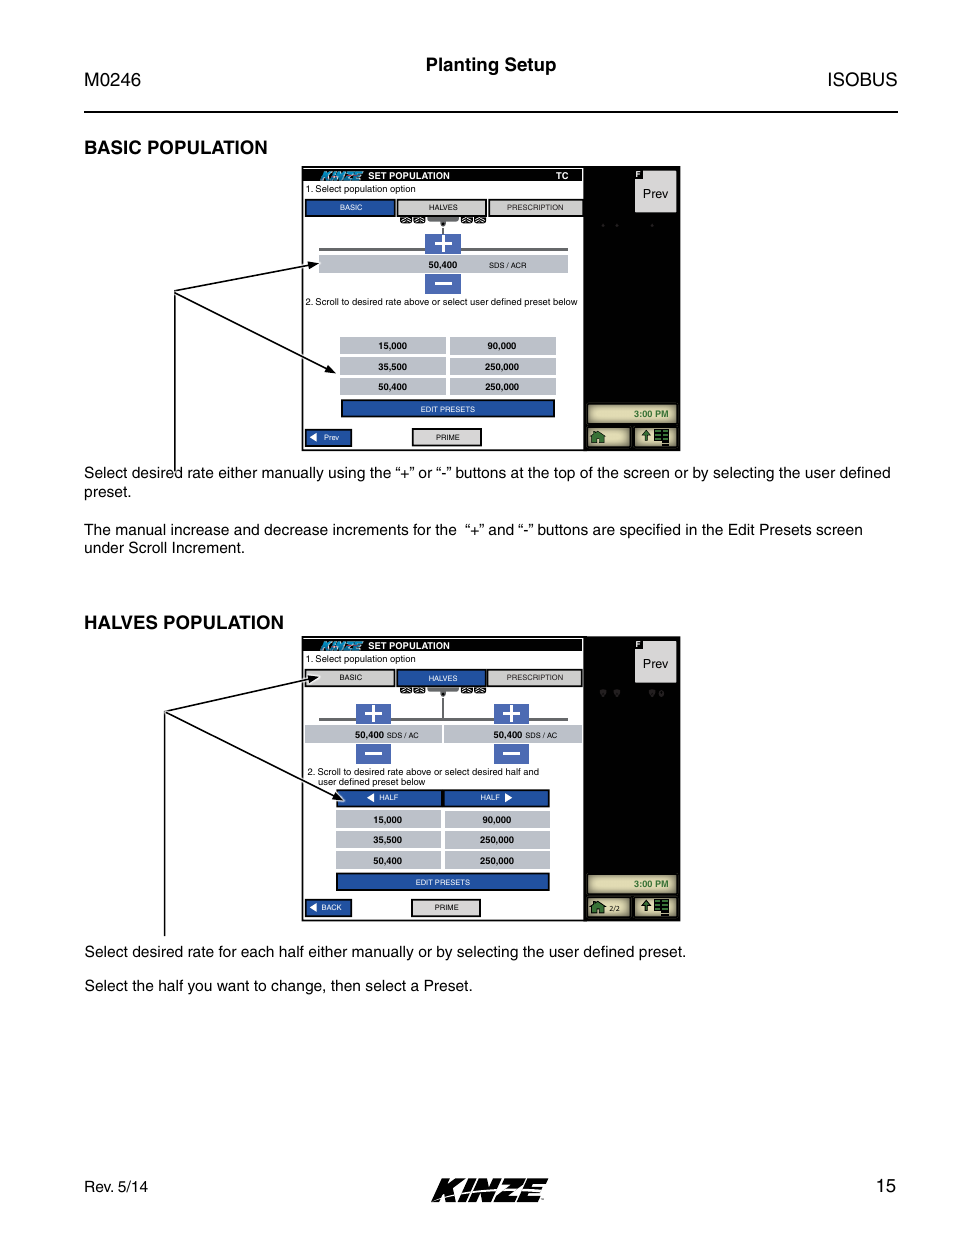 Basic population, Halves population, Basic population halves population | Isobus m0246, 15 basic population halves population, Planting setup, Rev. 5/14 | Kinze ISOBUS Electronics Package (3000 Series) Rev. 5/14 User Manual | Page 21 / 46